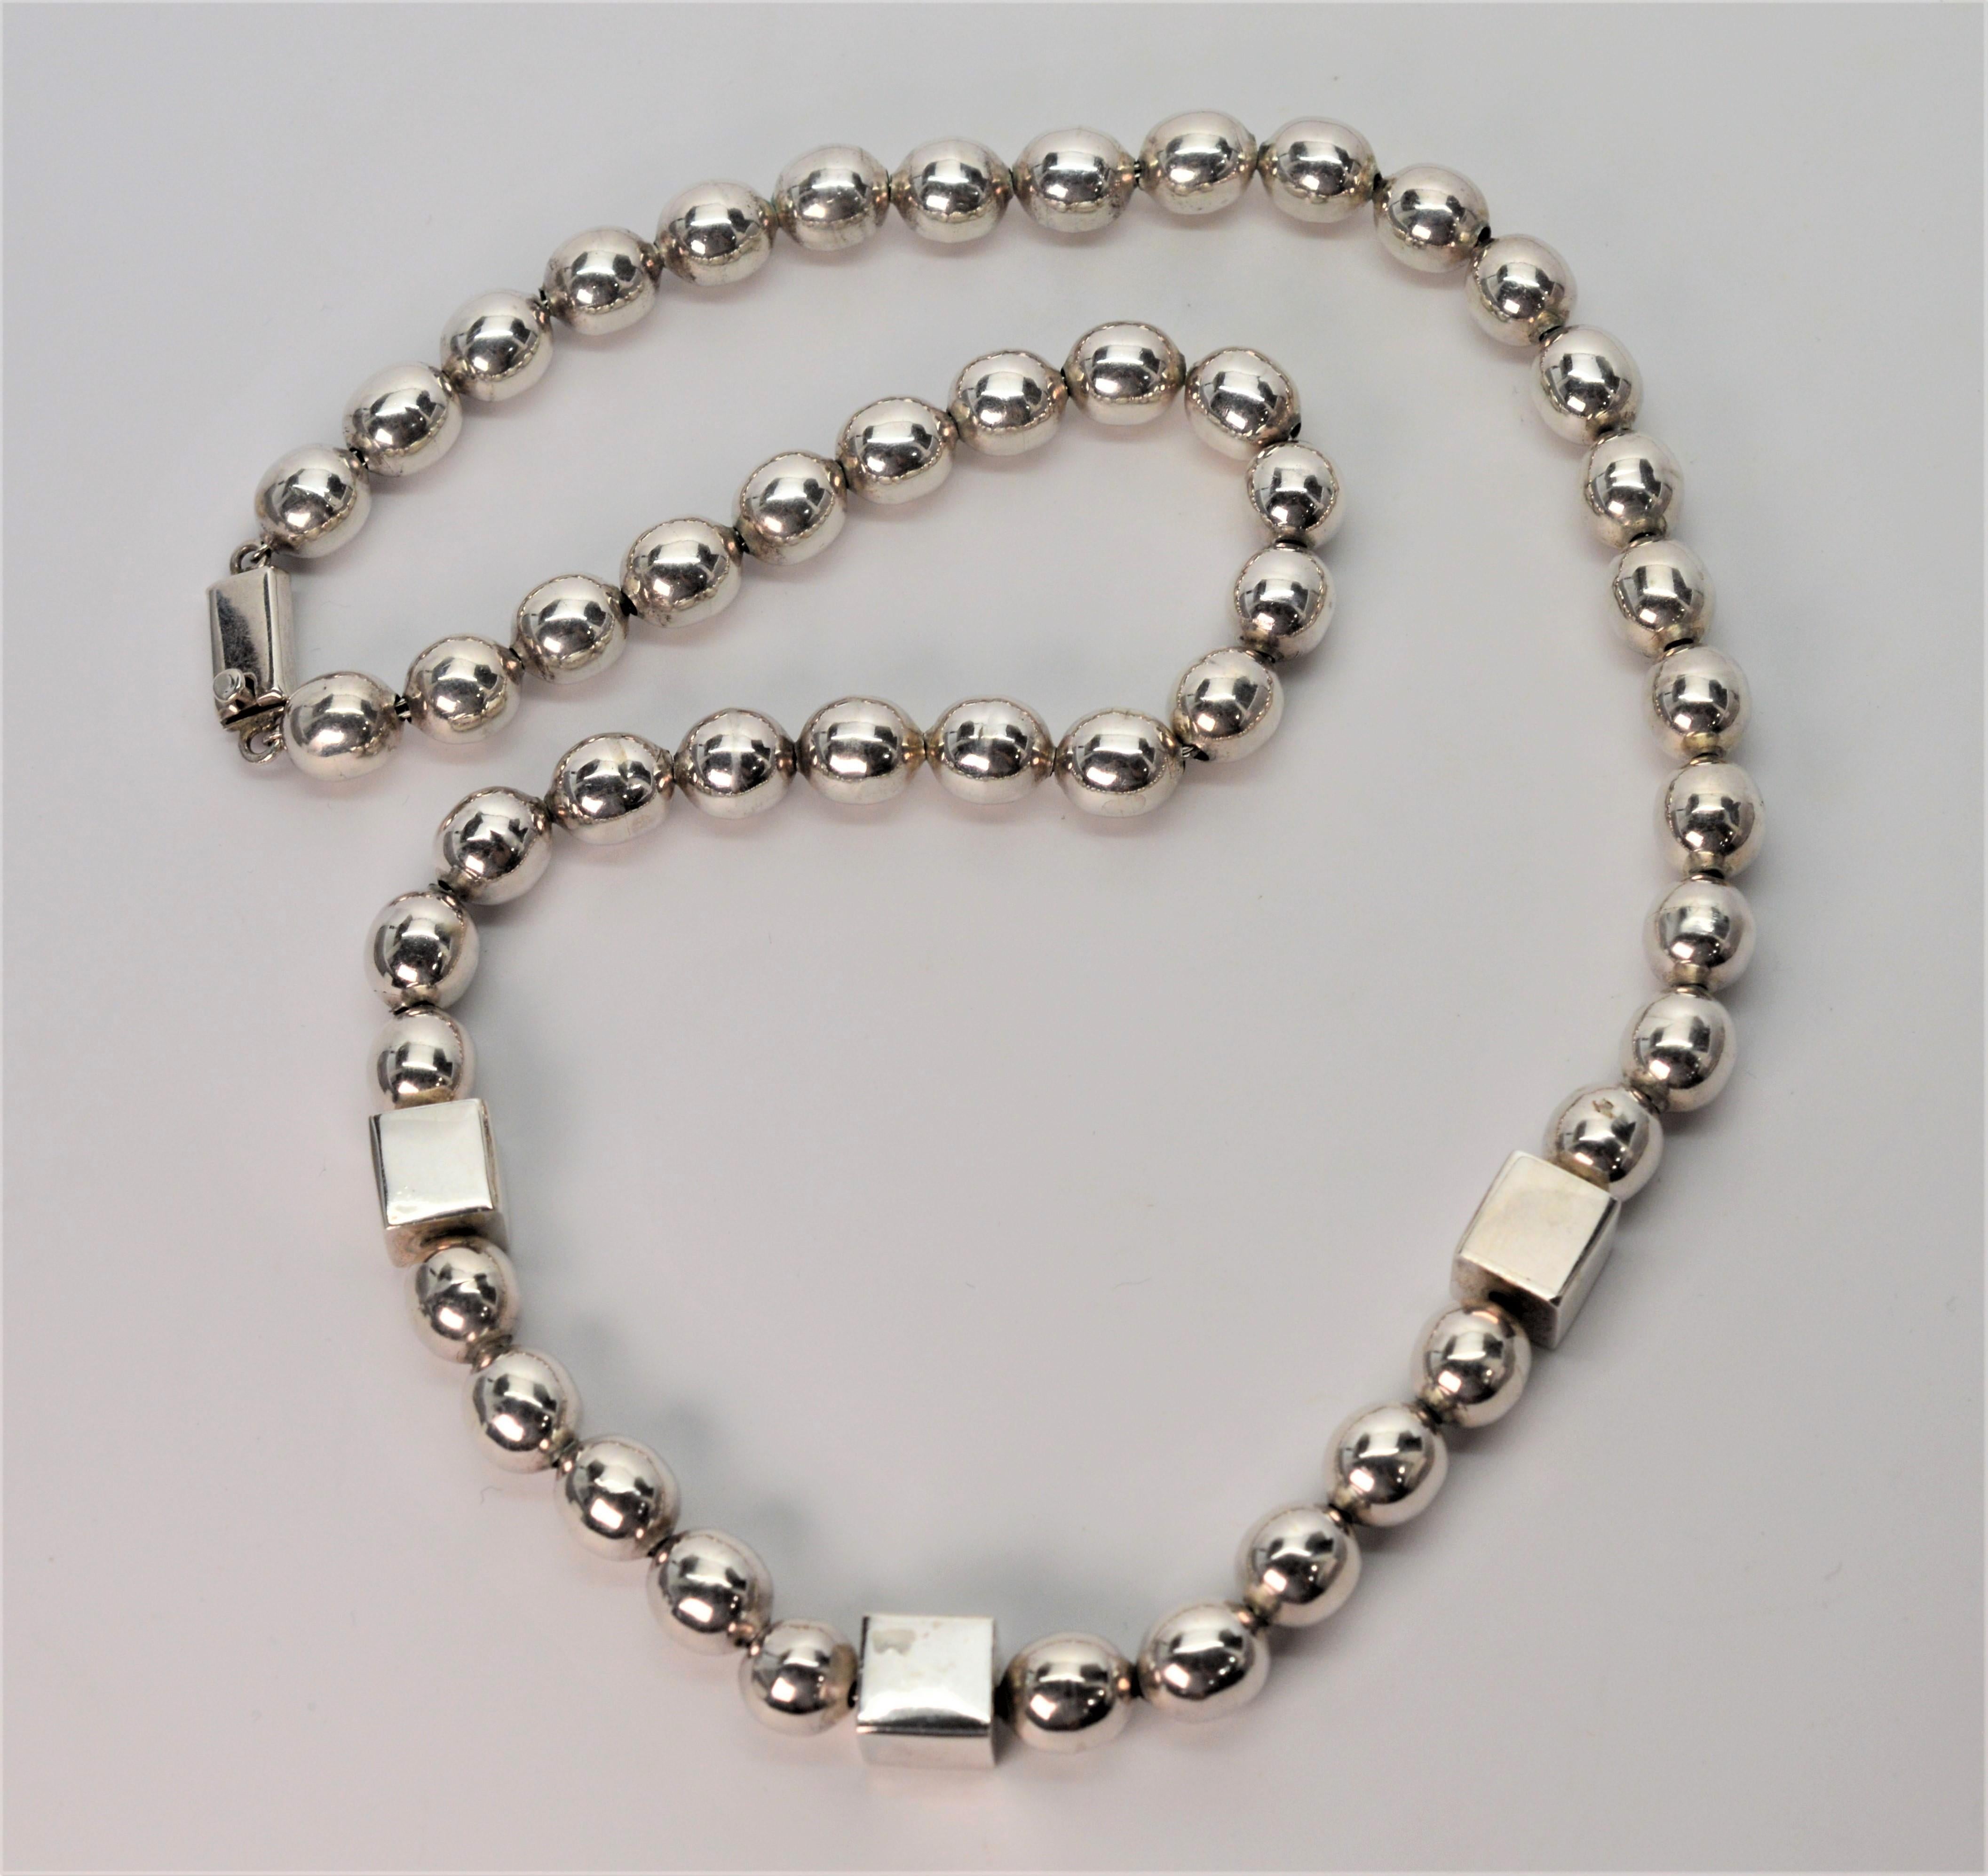 Bold, thick-bodied Sterling Silver Ball Chain Necklace crafted in Mexico of .925  Sterling Silver. Fifty round 10mm silver beads are accented with three featured square beads to give this relevant piece dimension. Twenty five inches in length with